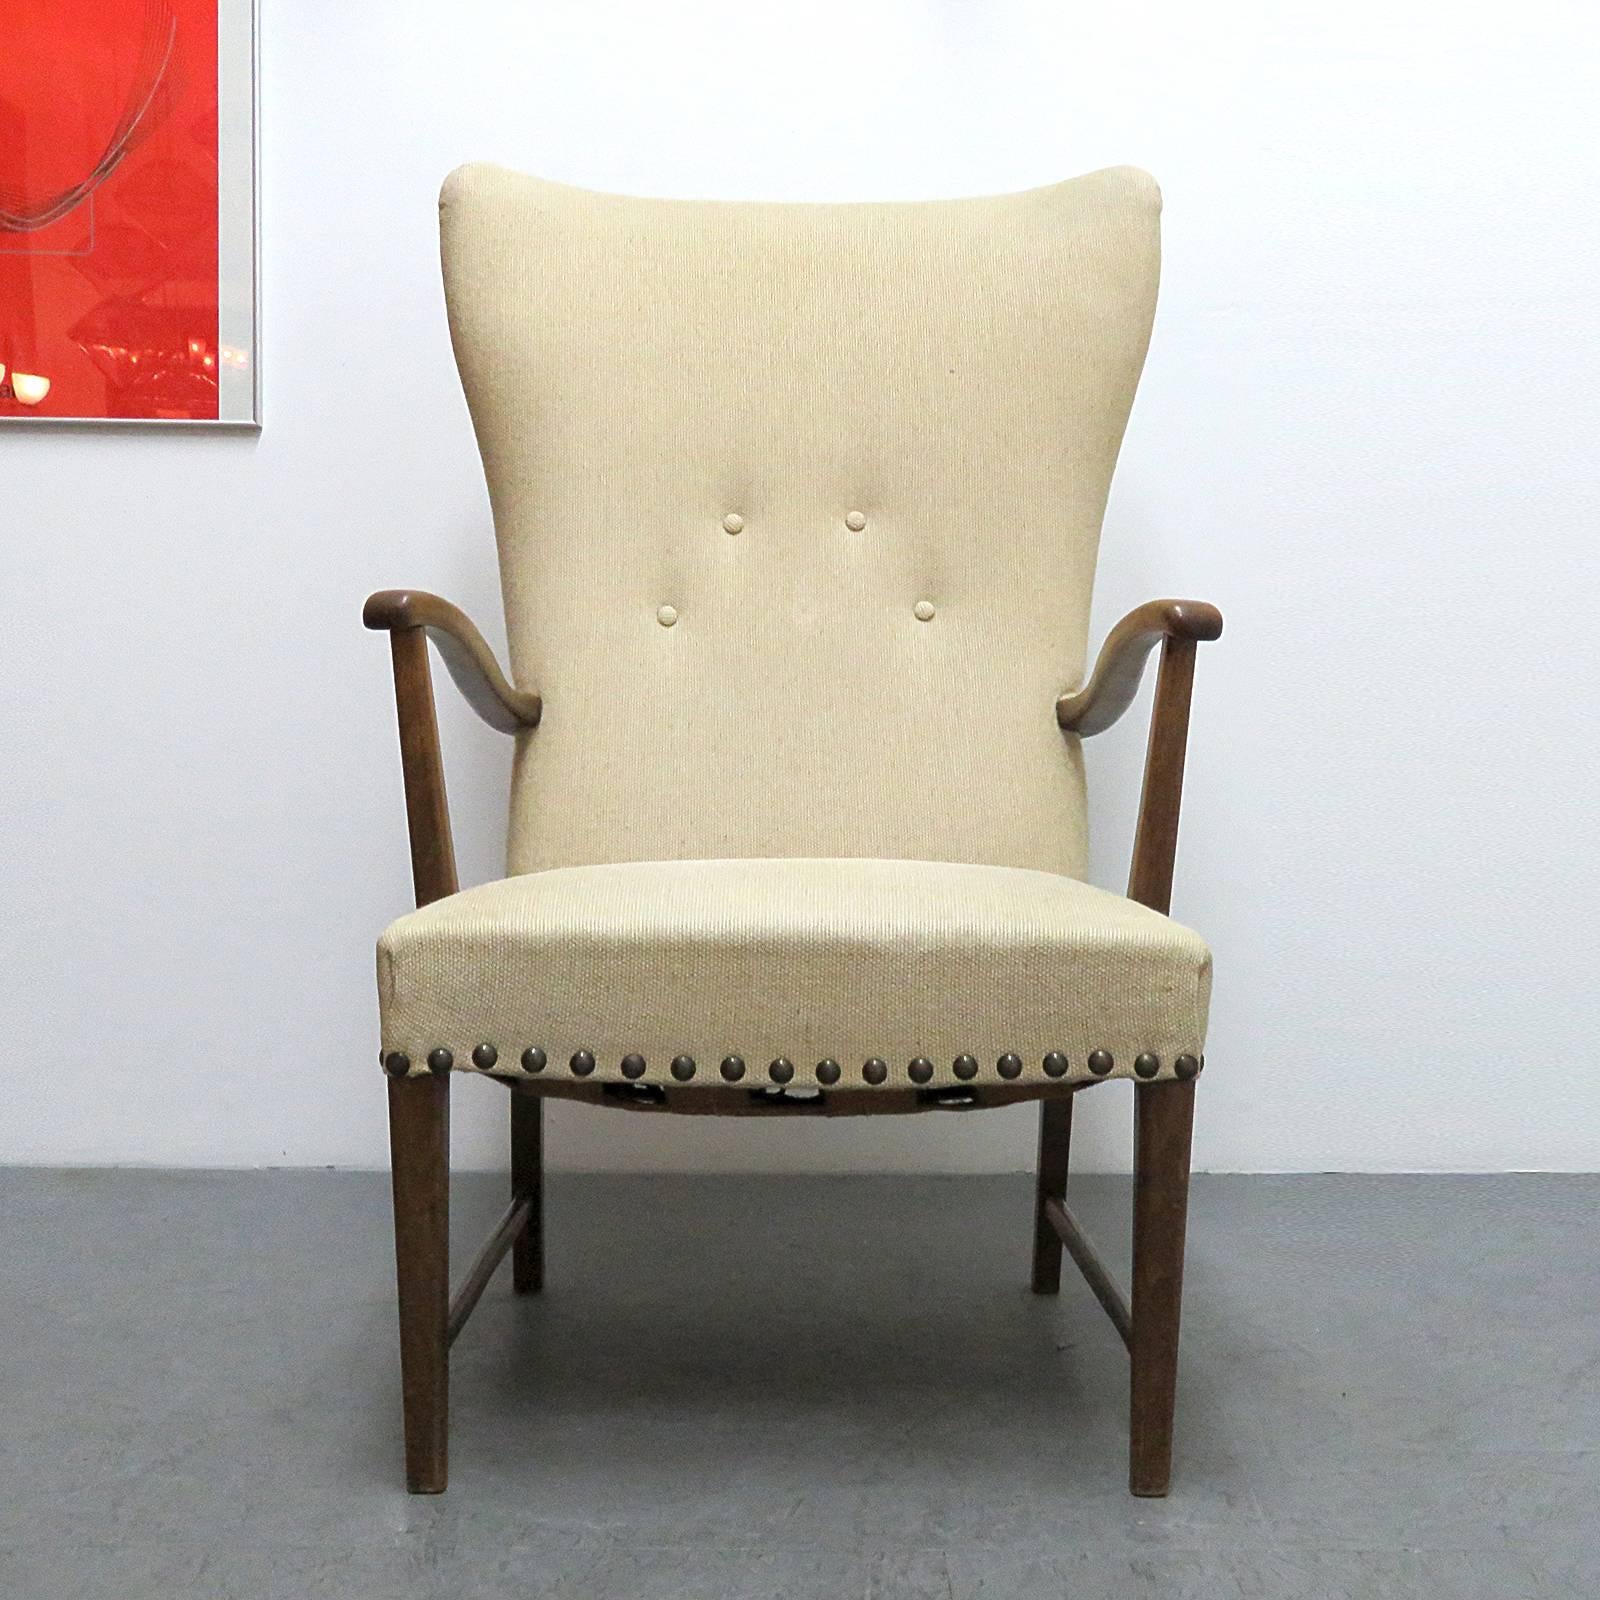 stunning 1940s Danish Mobler wing back lounge chair, oak frame with sculptural arms and original sand color wool upholstery with brass nail head trim, backrest tufted with four (originally five) covered buttons